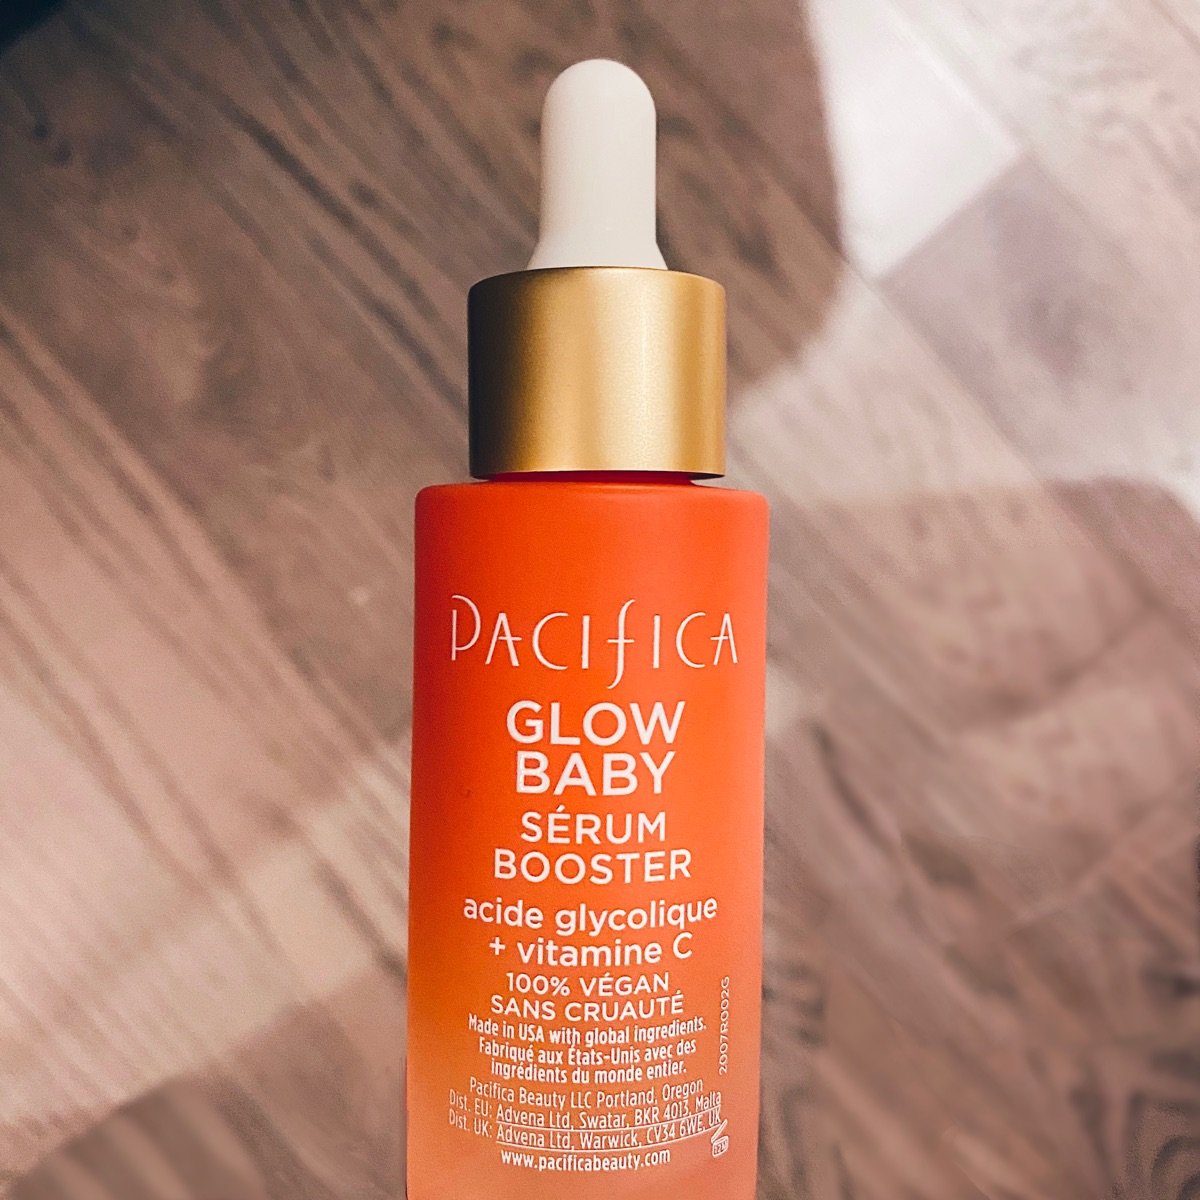 Pacifica Glow Baby Booster Serum Reviews | abillion